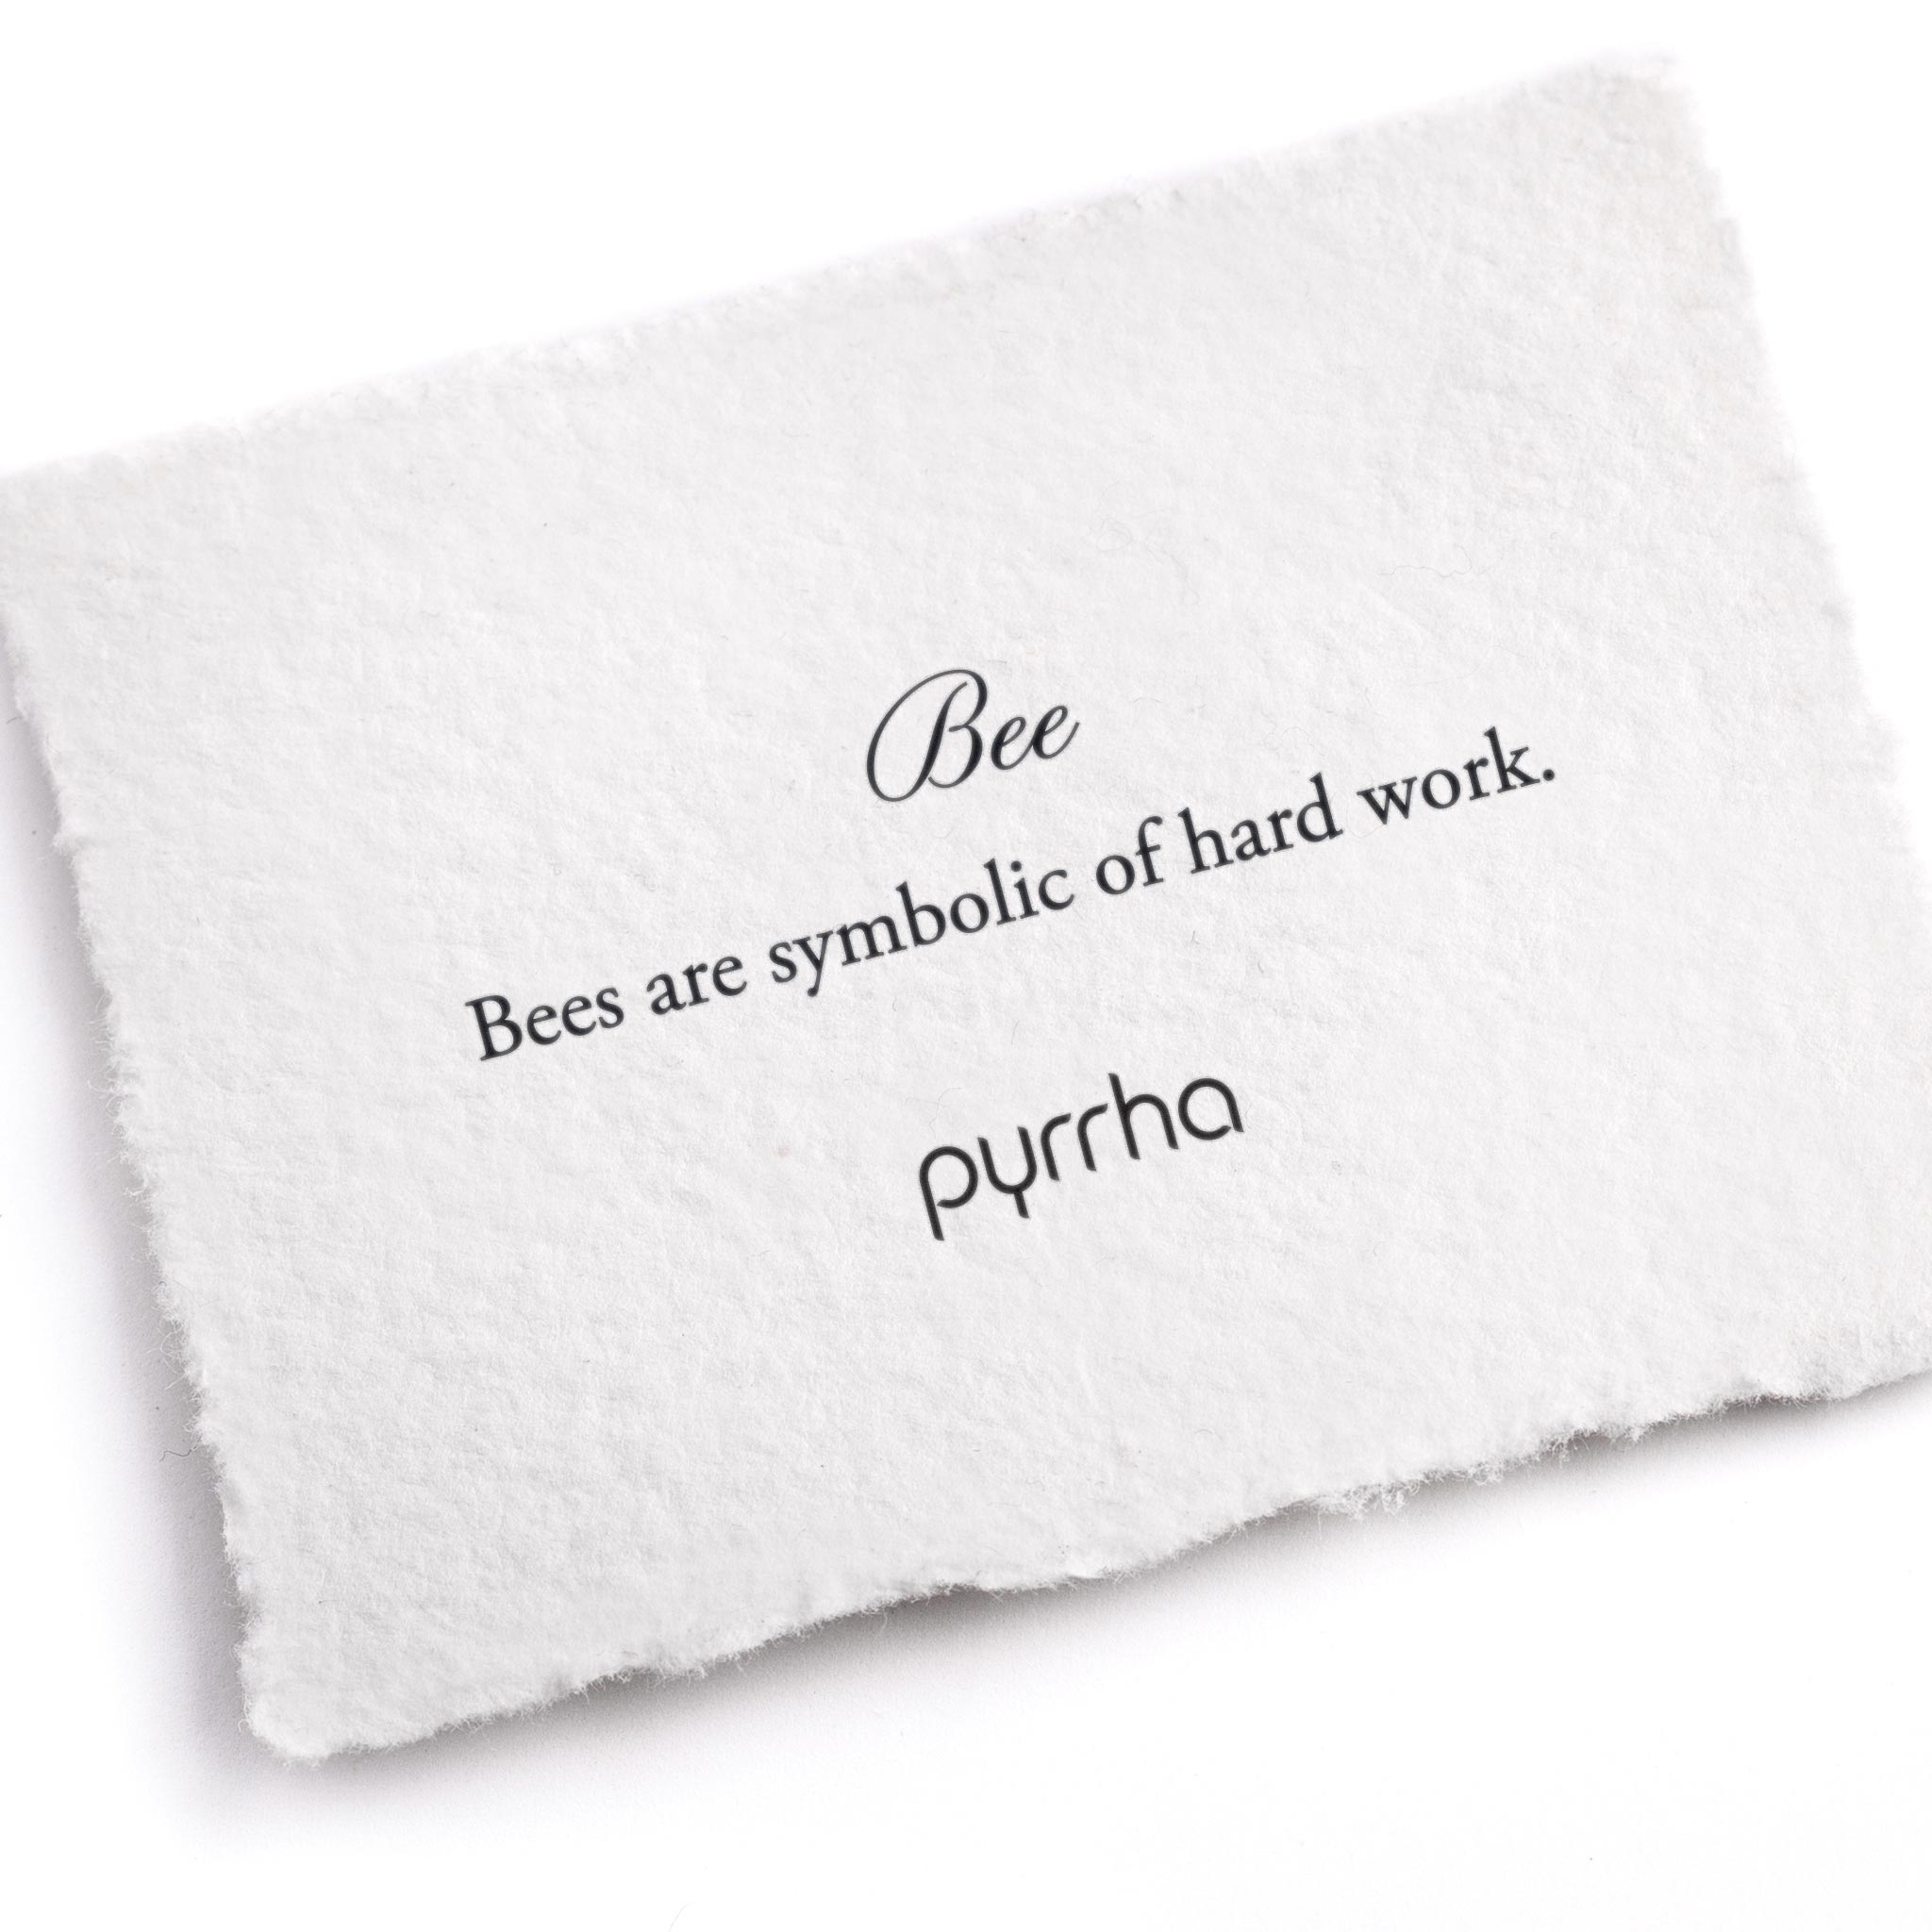 A handtorn cotton card describing the meaning for our Bee 14K Gold Symbol Charm Bracelet.